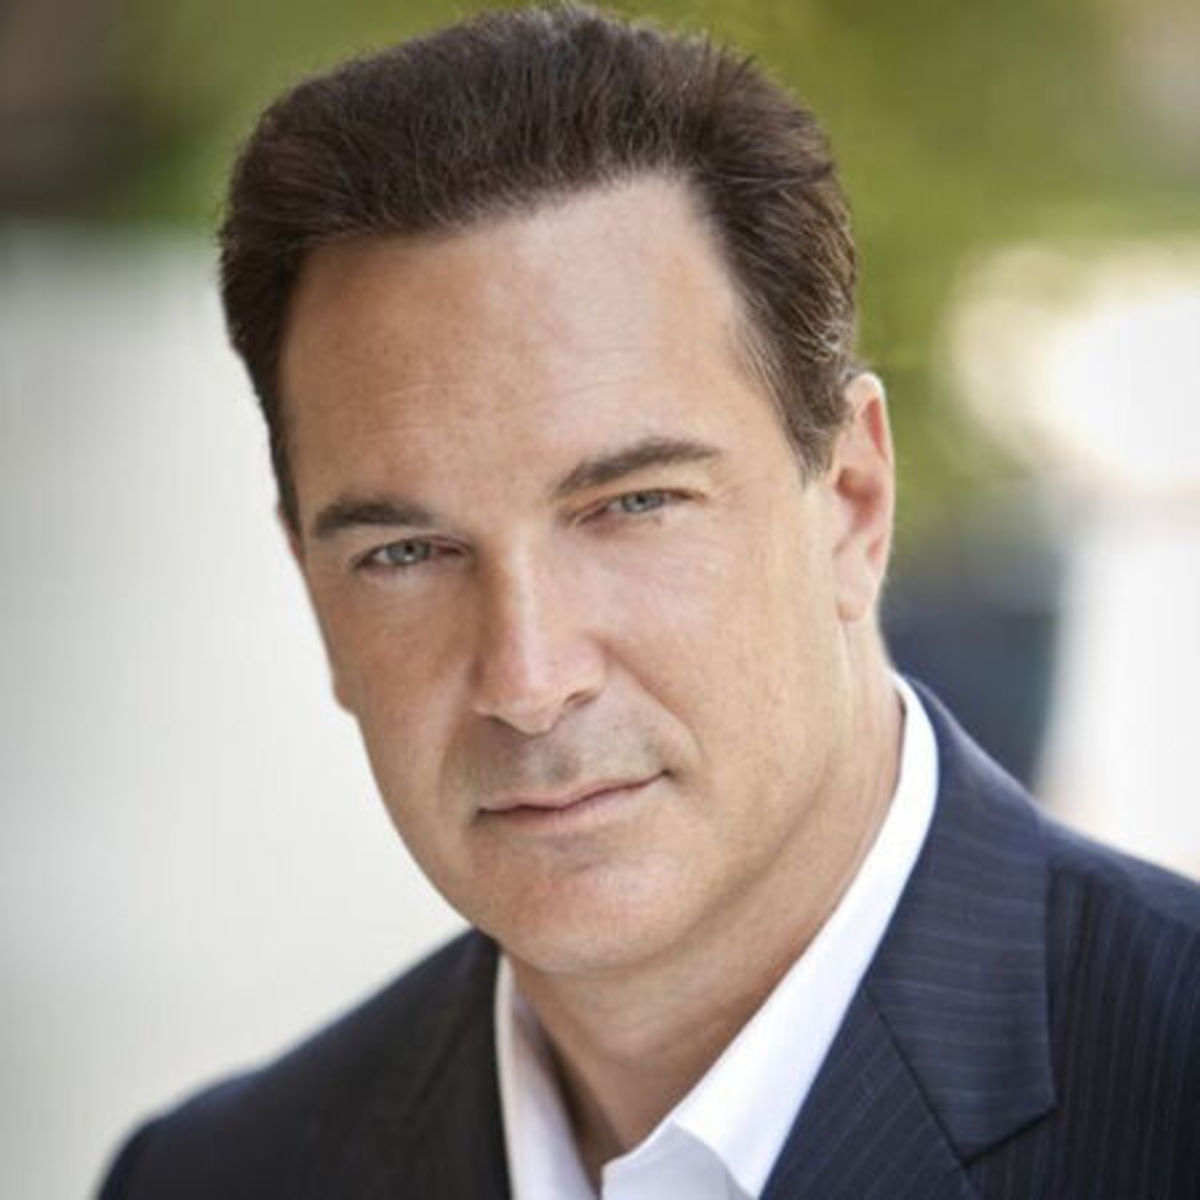 With Patrick Warburton's smooth looks, it is no wonder why he is successful.